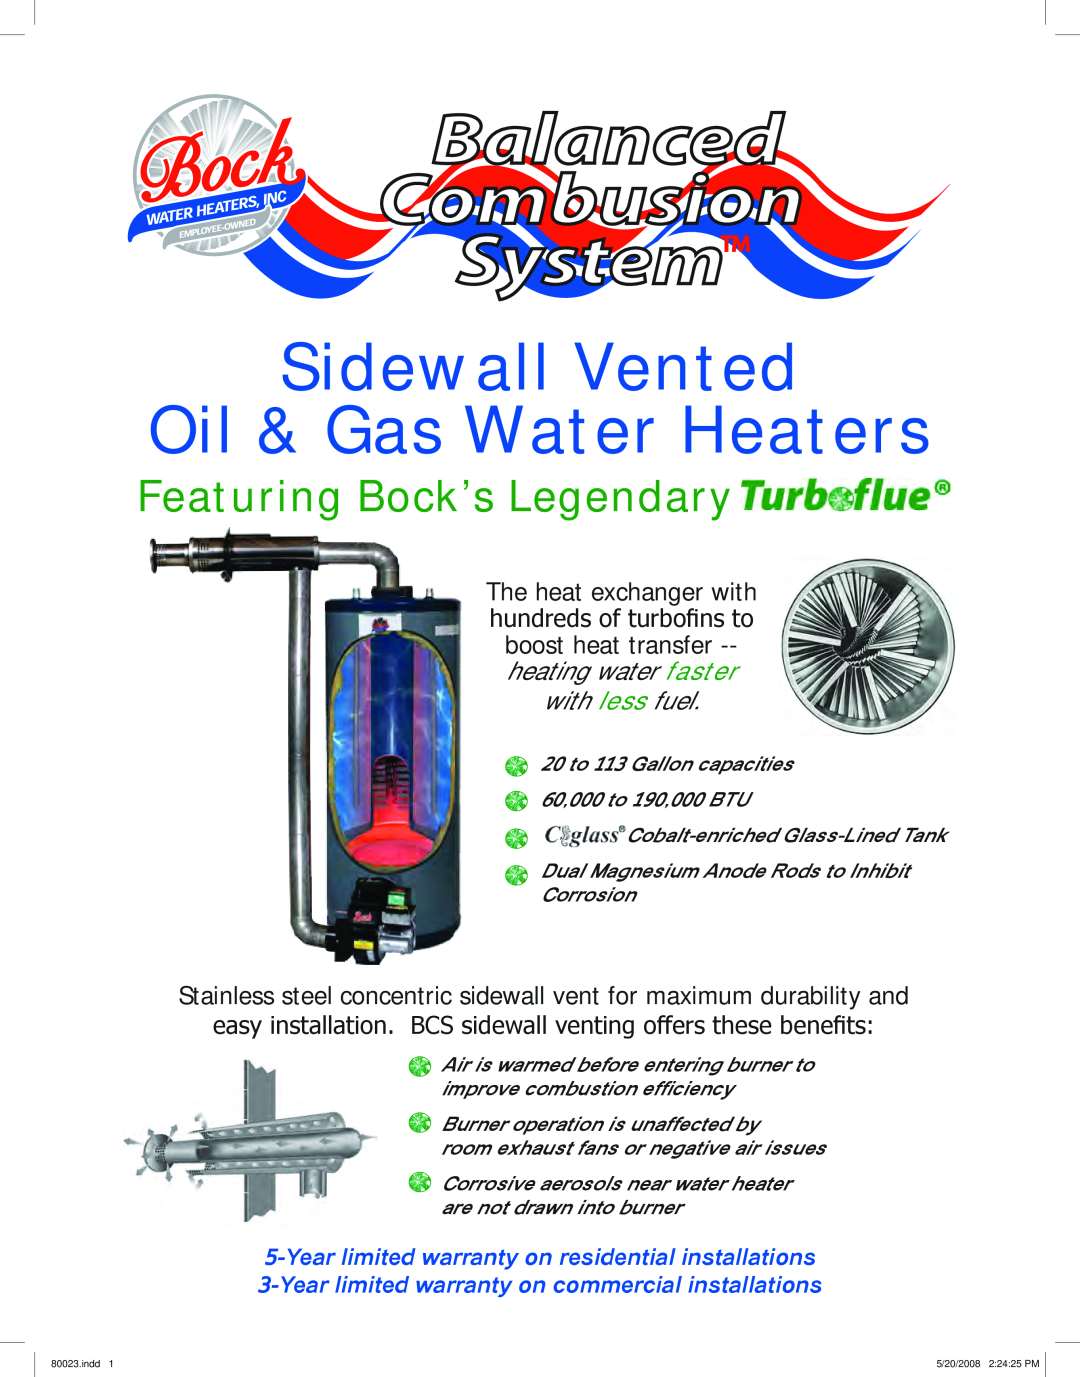 Bock Water heaters 51PG-BCS warranty Balanced Combusion System, Sidewall Vented Oil & Gas Water Heaters, with less fuel 